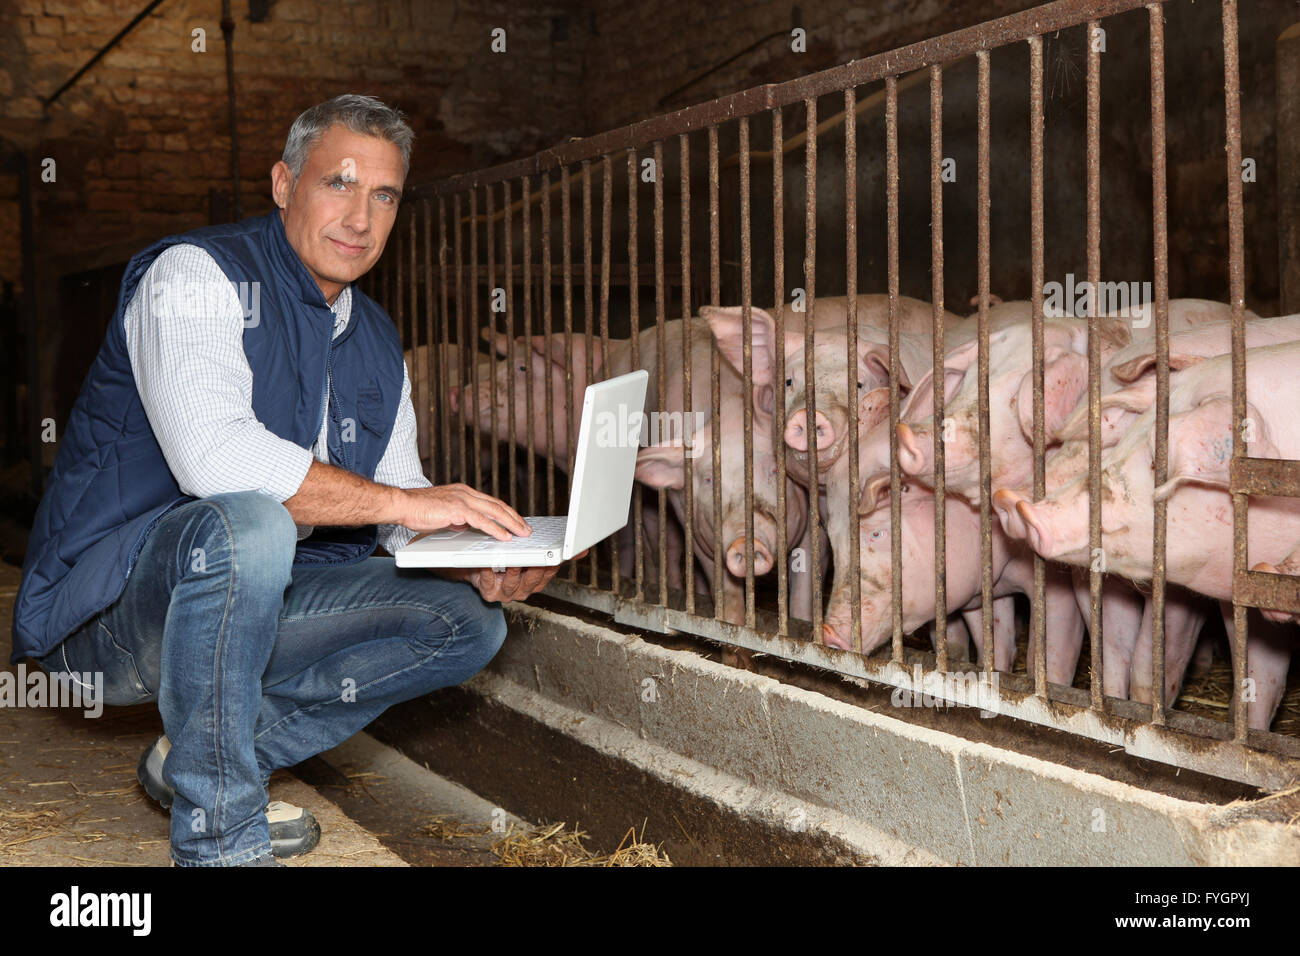 50 years old breeder with a laptop in front of pigs Stock Photo